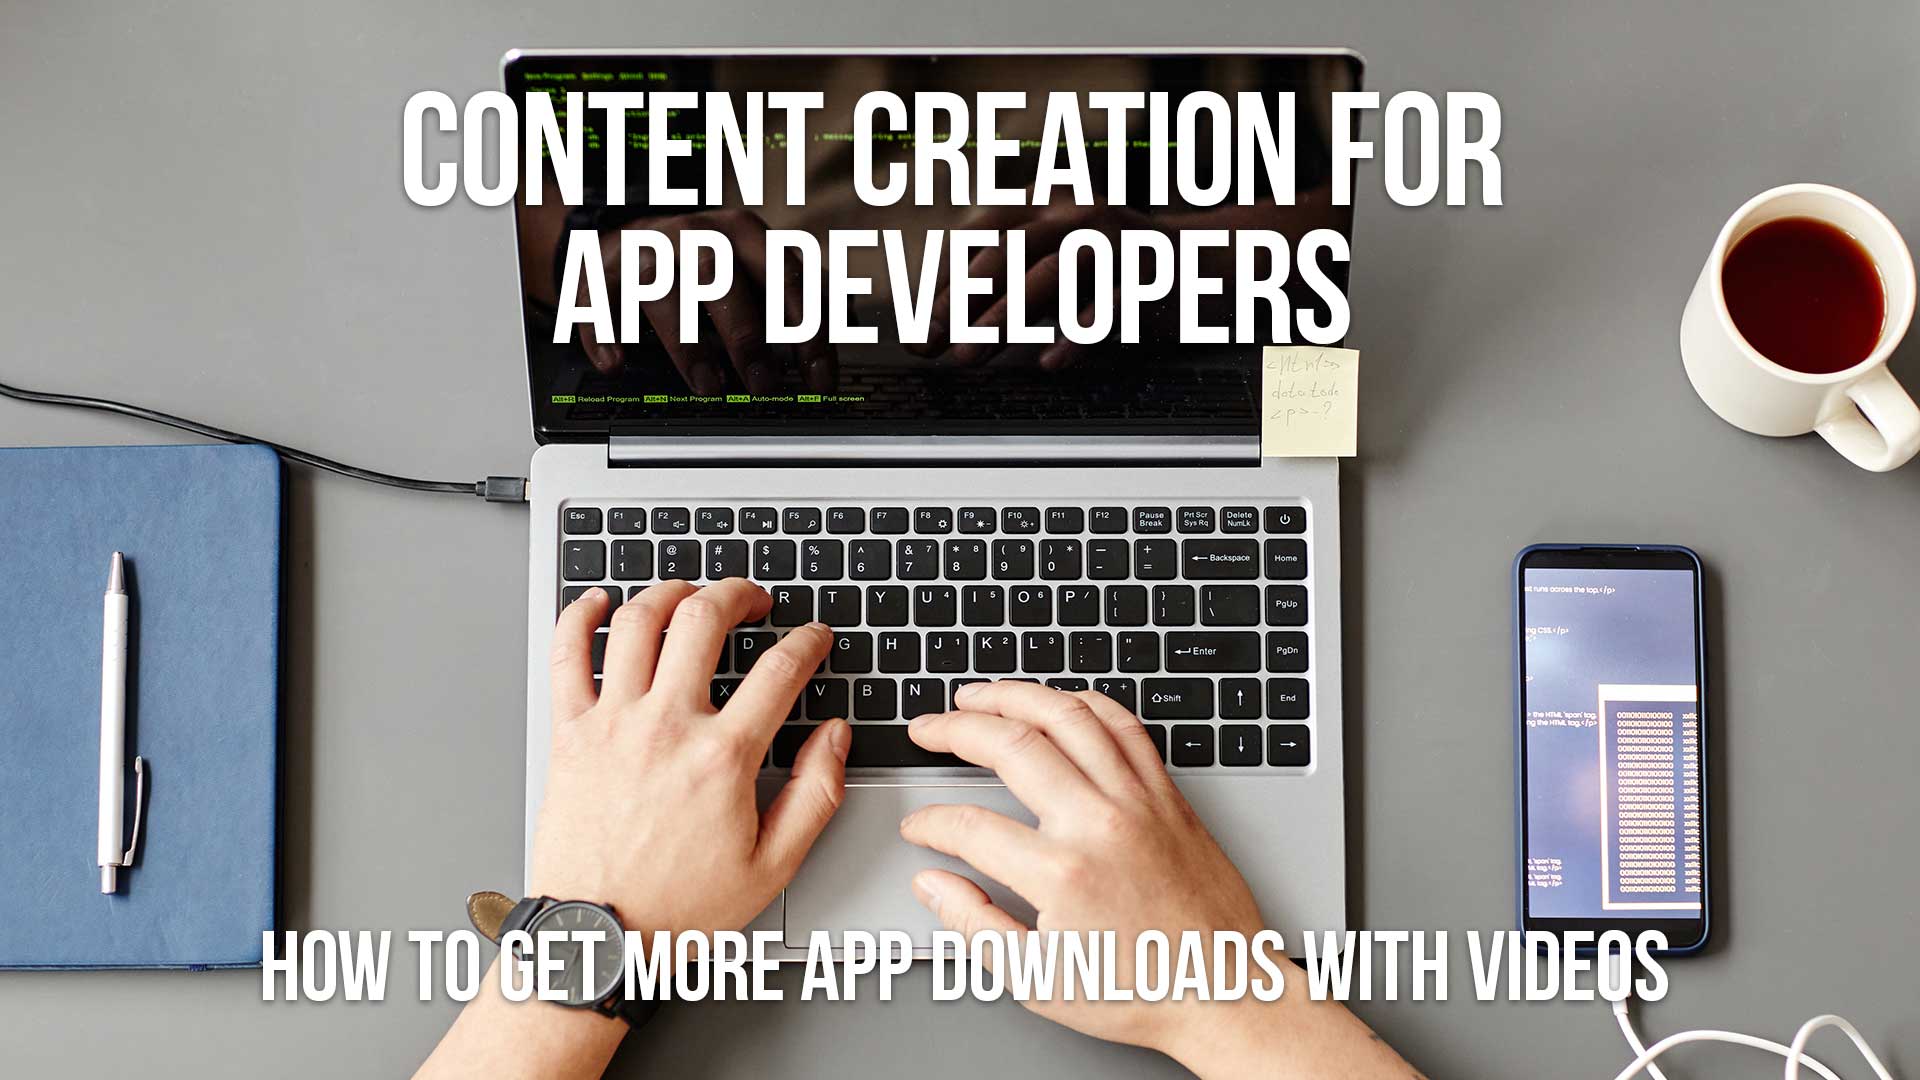 Content Creation for App Developers - How to Get More App Downloads With Videos